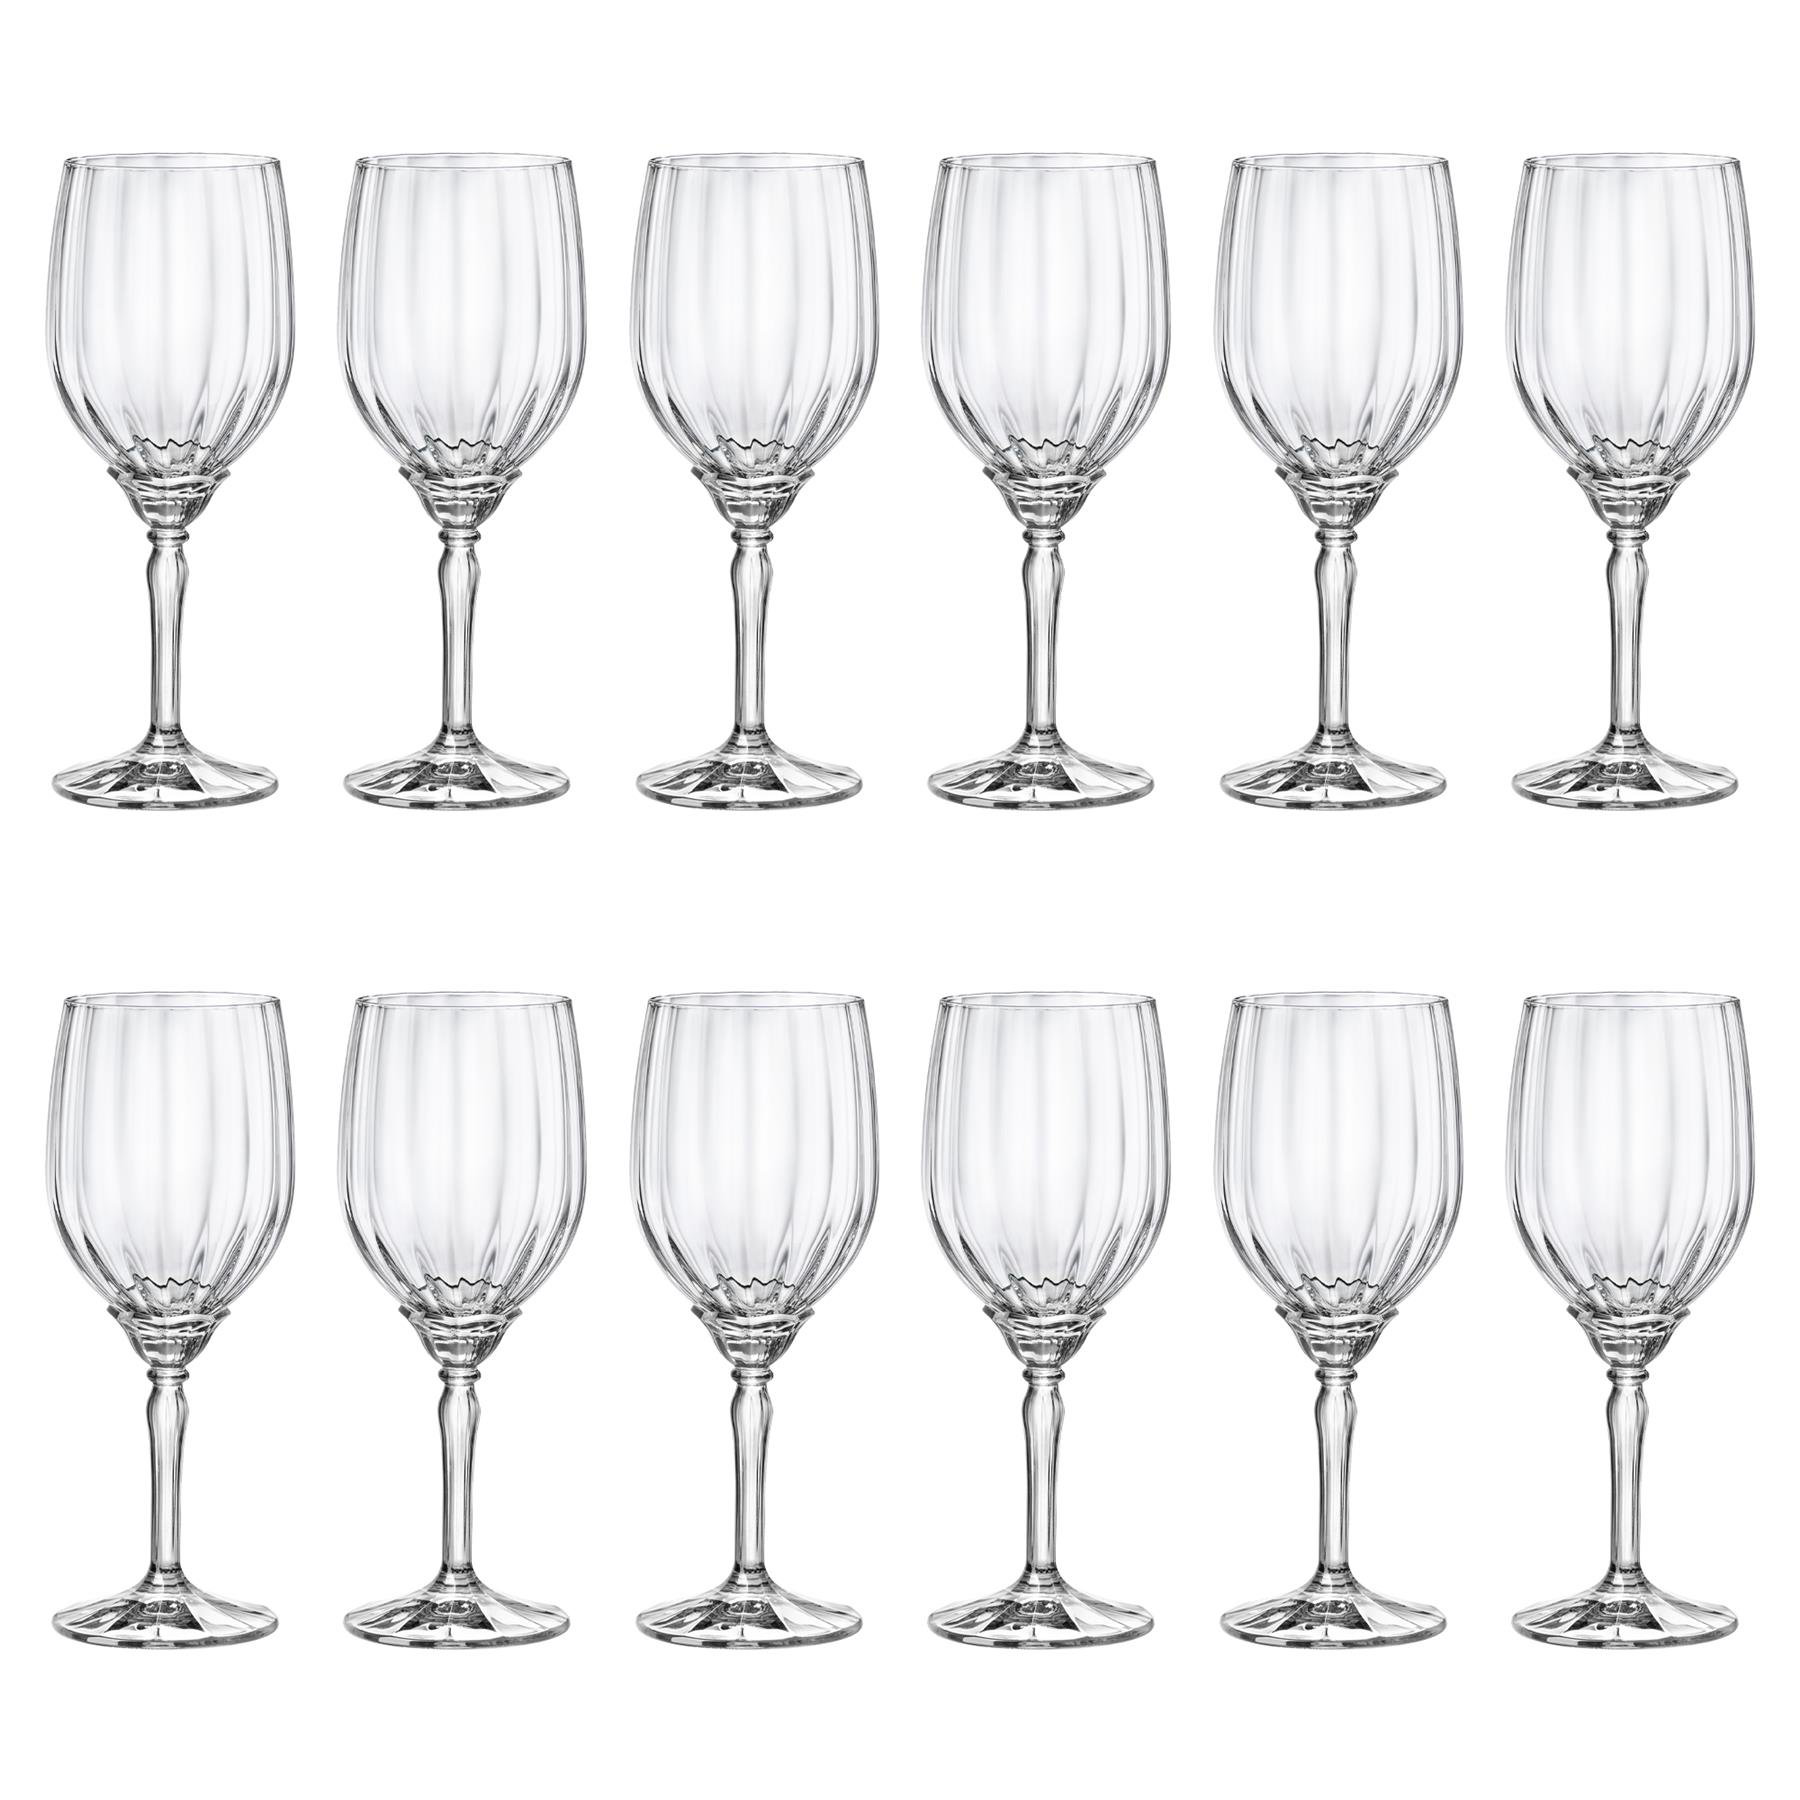 12x Bormioli Rocco Florian White Wine Glasses Small Glass Red Rose Party Set 380ml Clear